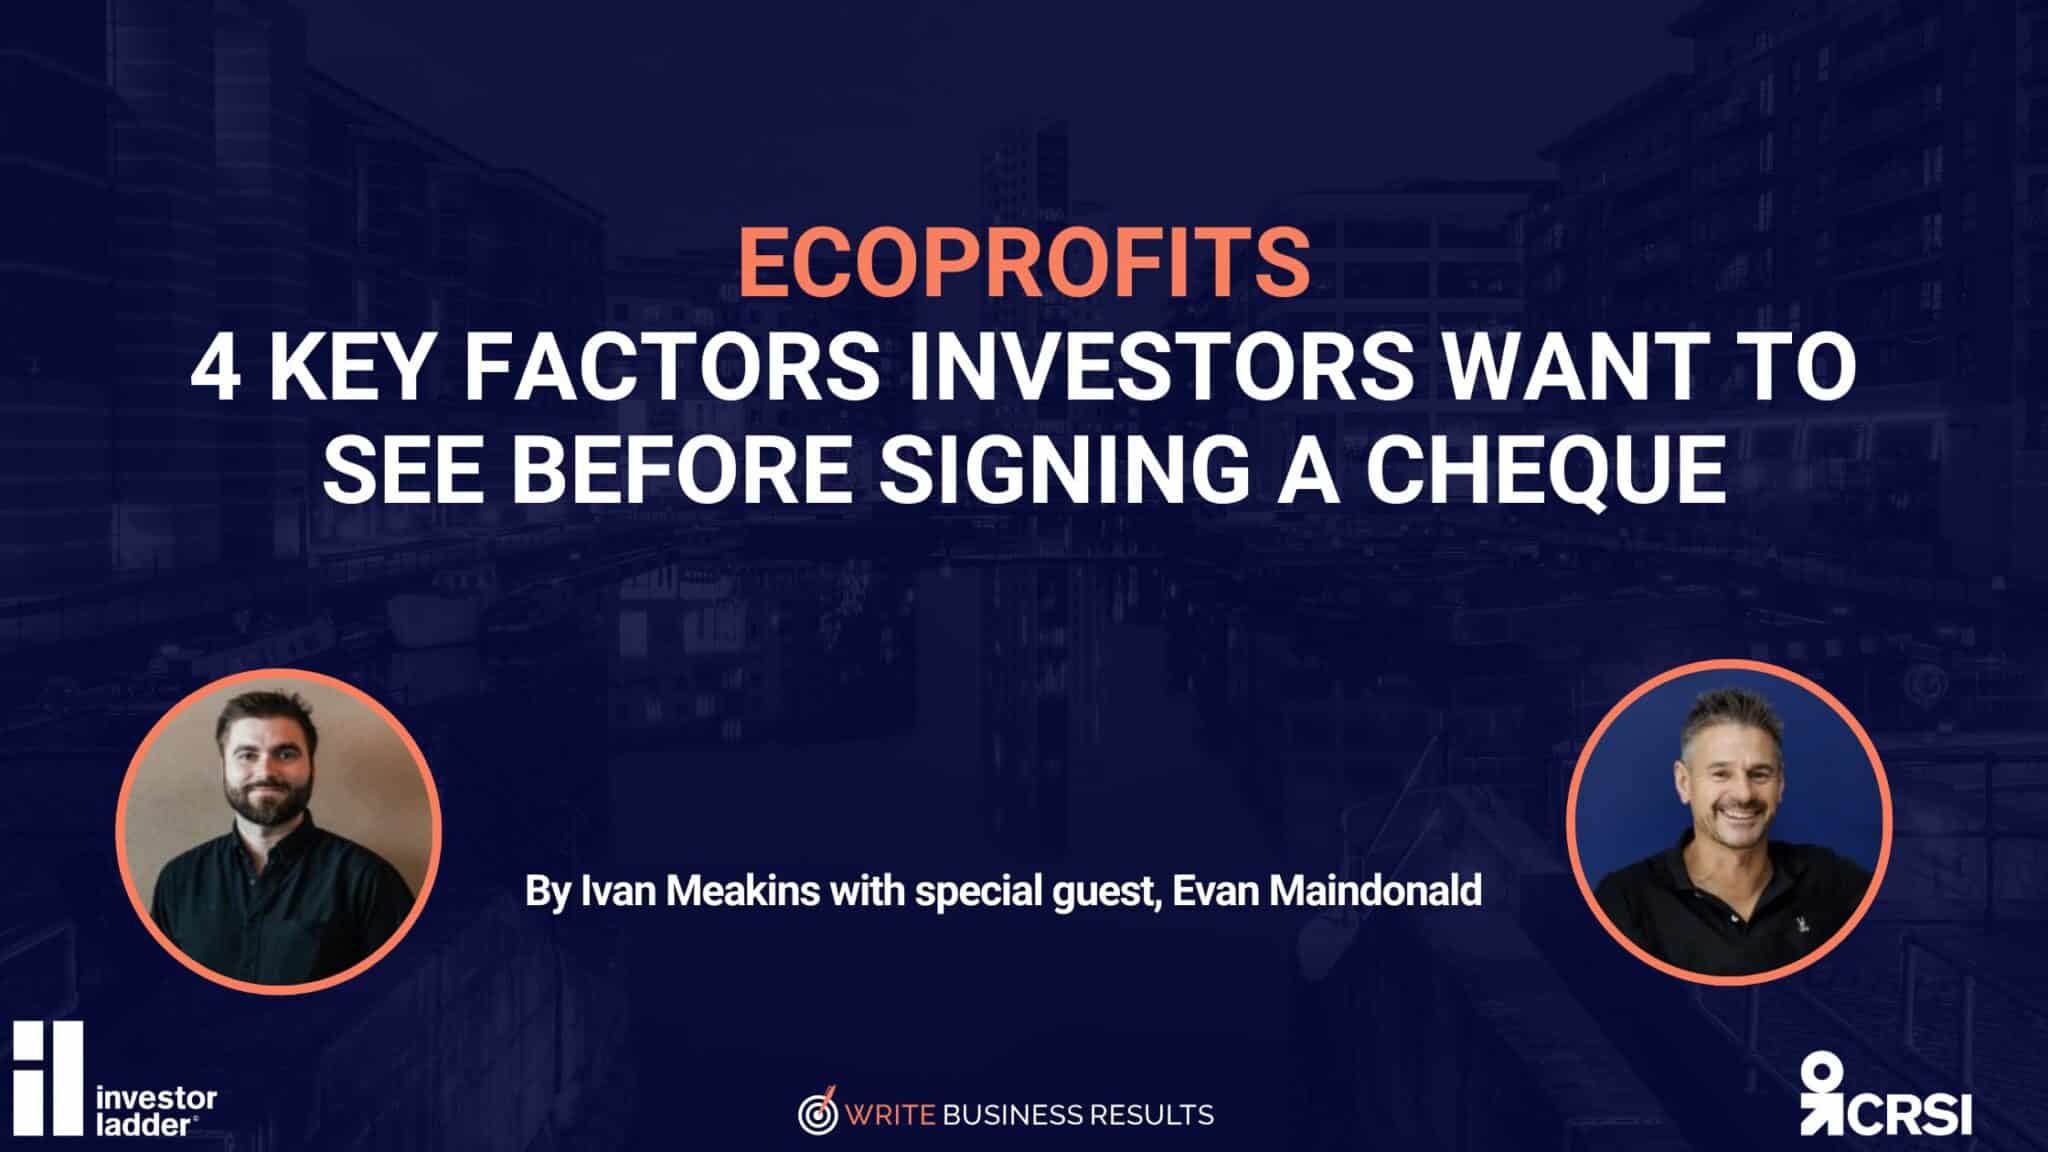 Ecoprofits: 4 Key Factors Investors Want To See Before Signing A Cheque